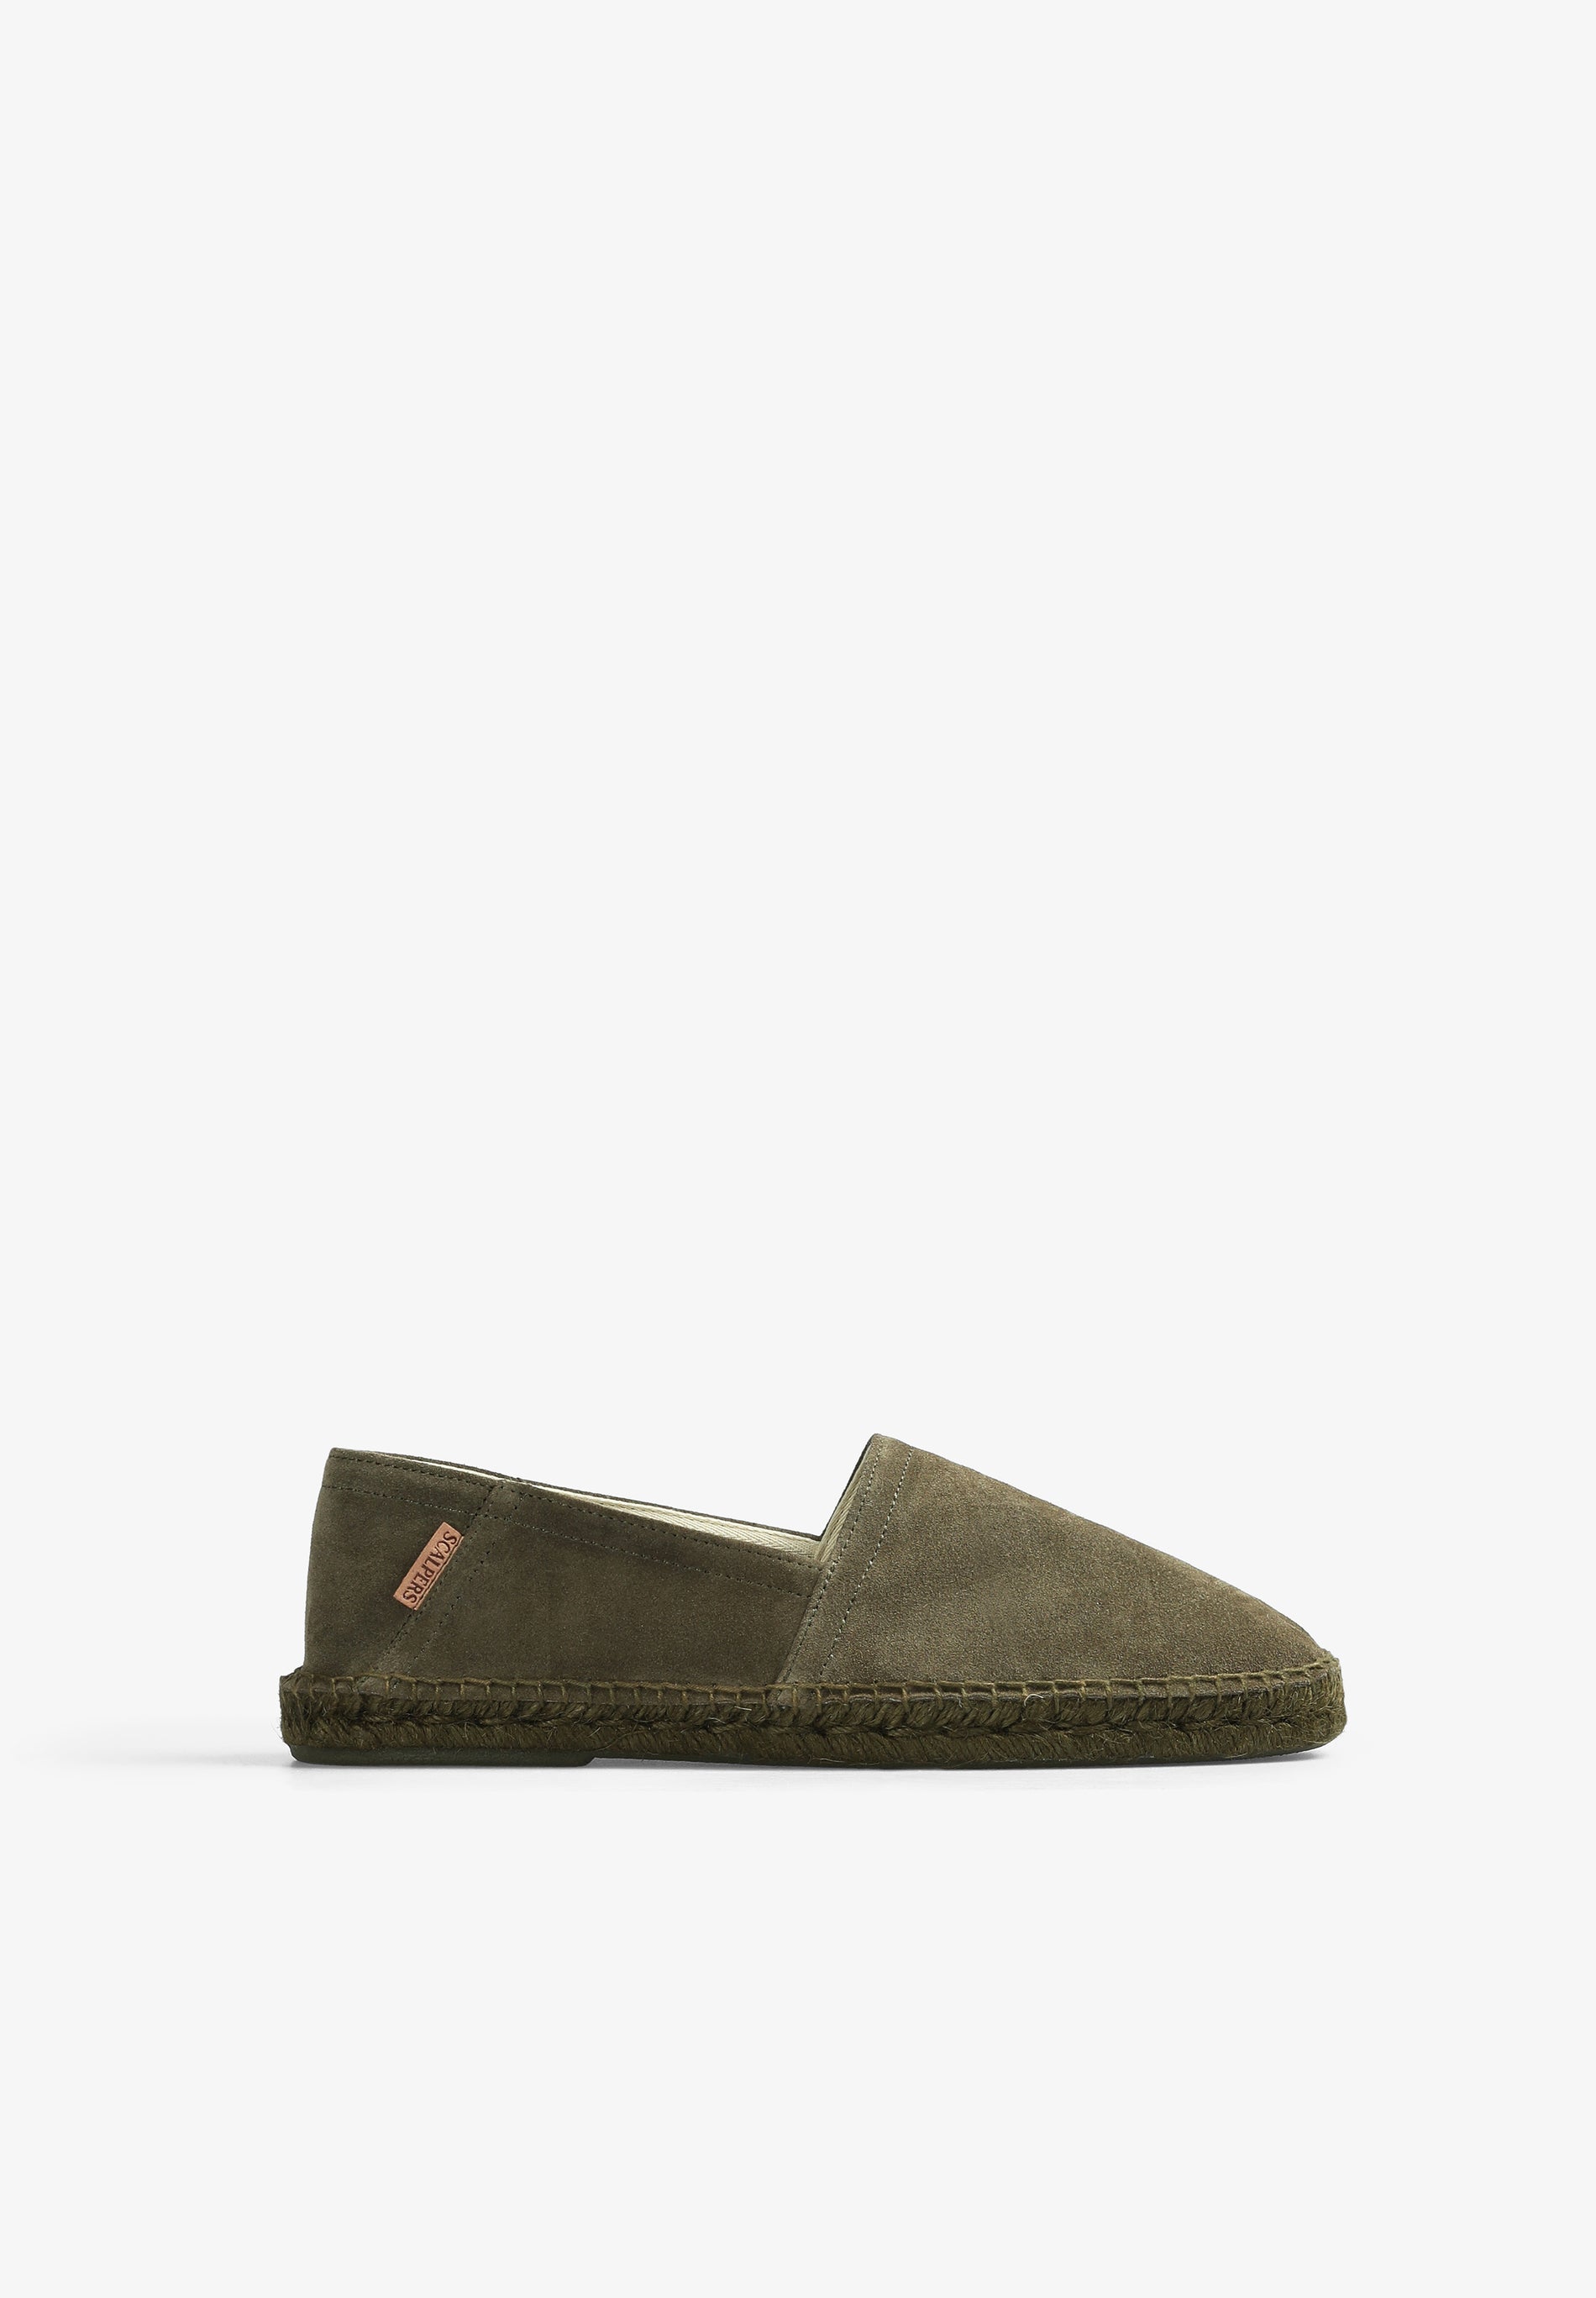 SUEDE ESPADRILLES WITH MATCHING SOLE